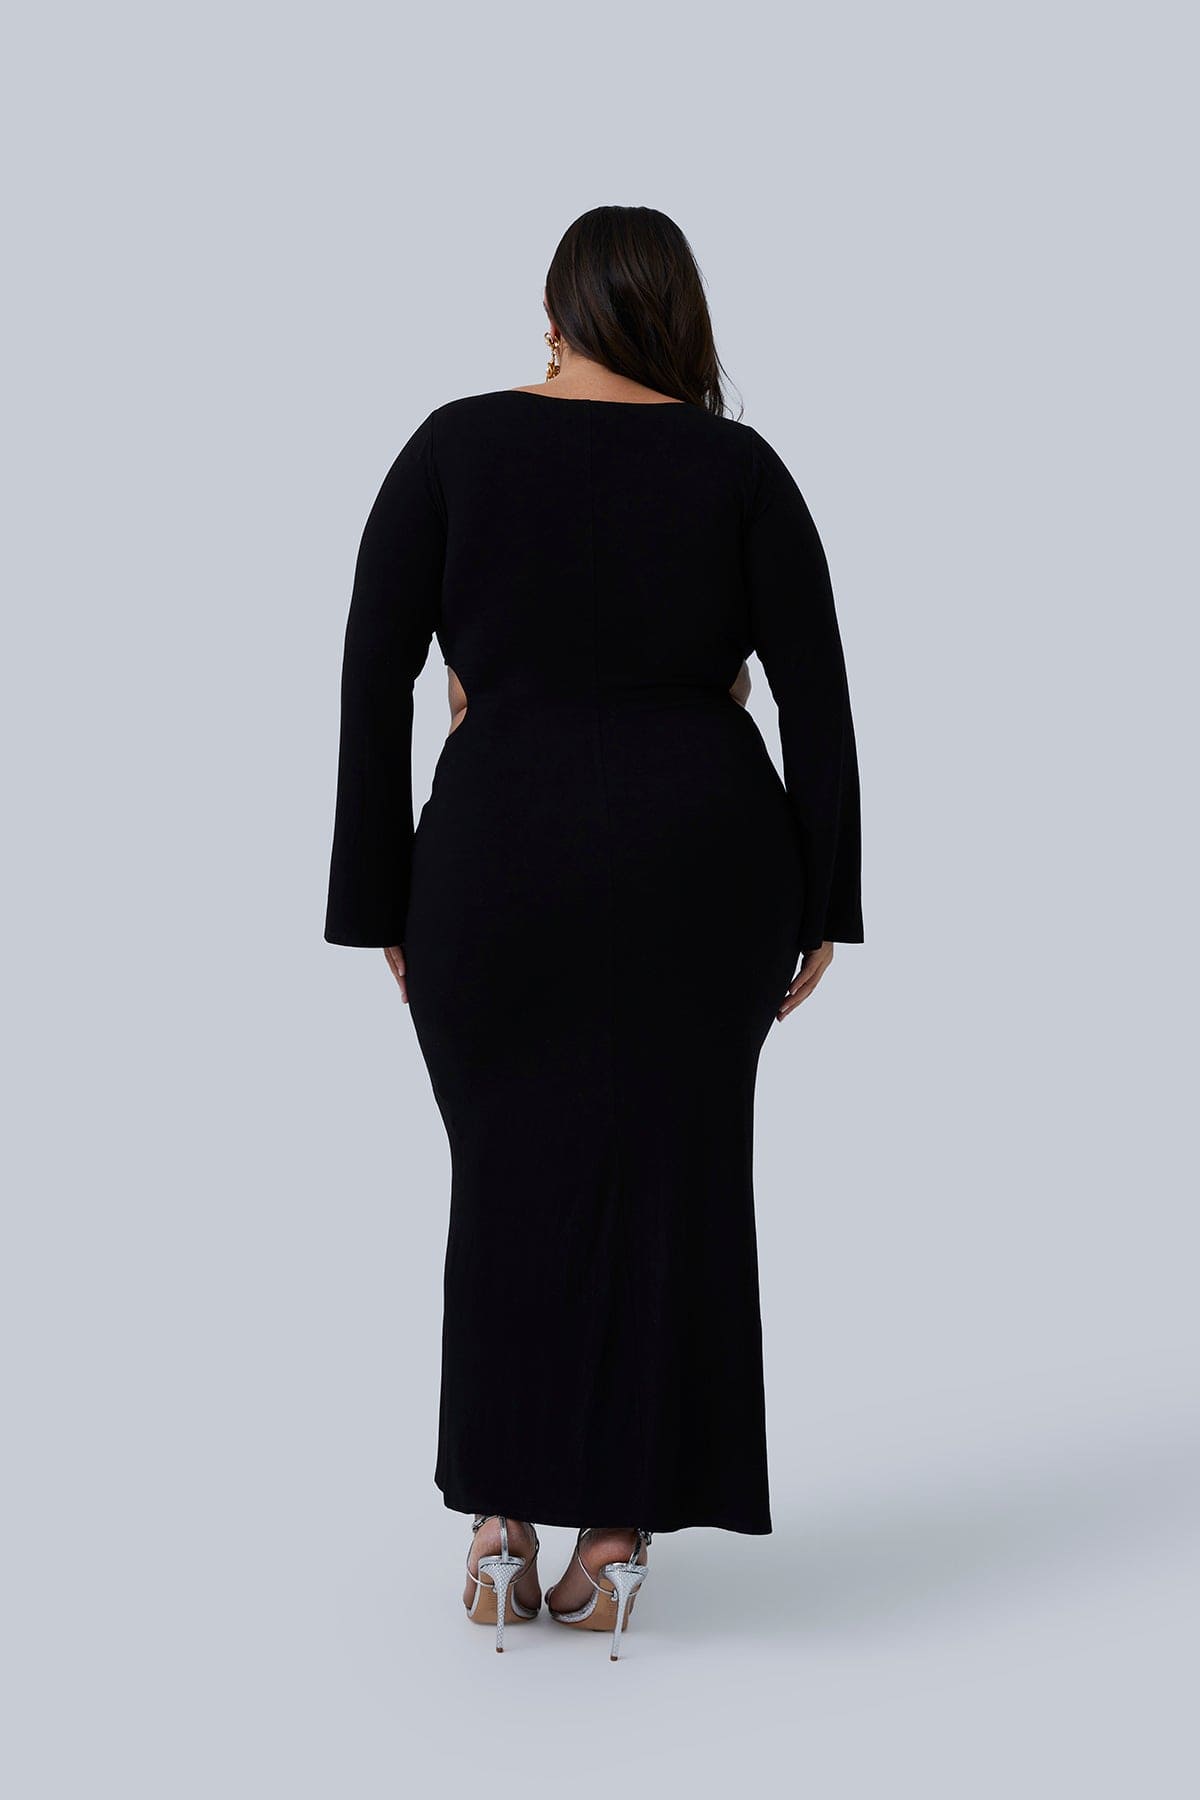 Back view of the Gabrielle Maxi dress. Long double-layered stretchy maxi dress for plus size women. Model is standing with hands by her side showing flared sleeves. Dress goes to ankles.